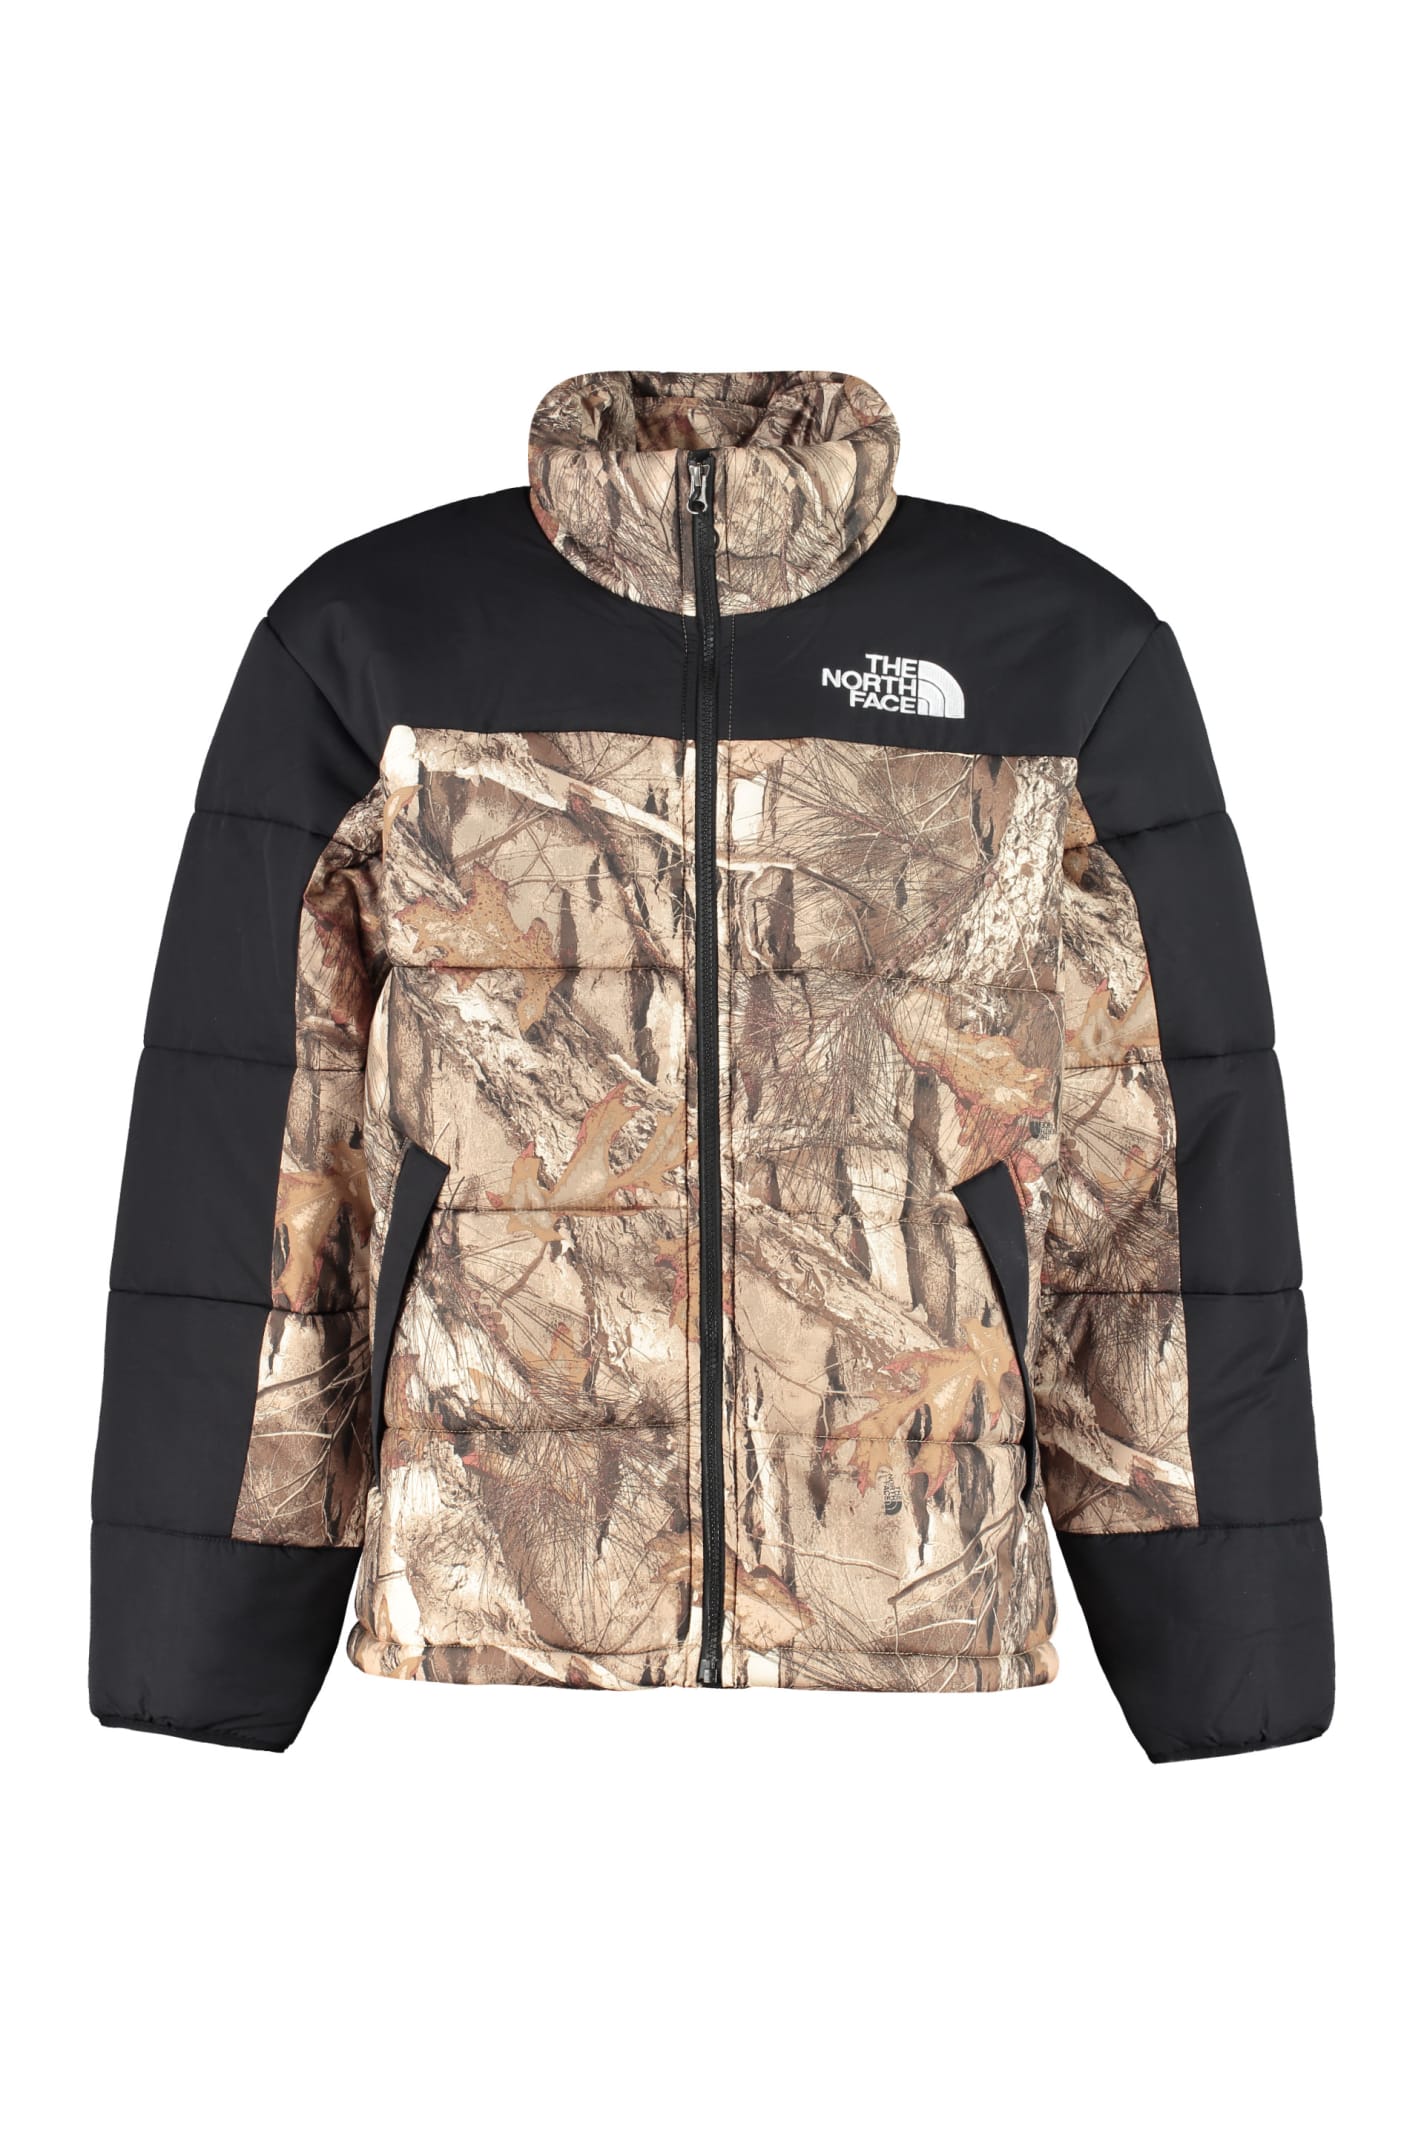 The North Face Hymalayan Padded Jacket